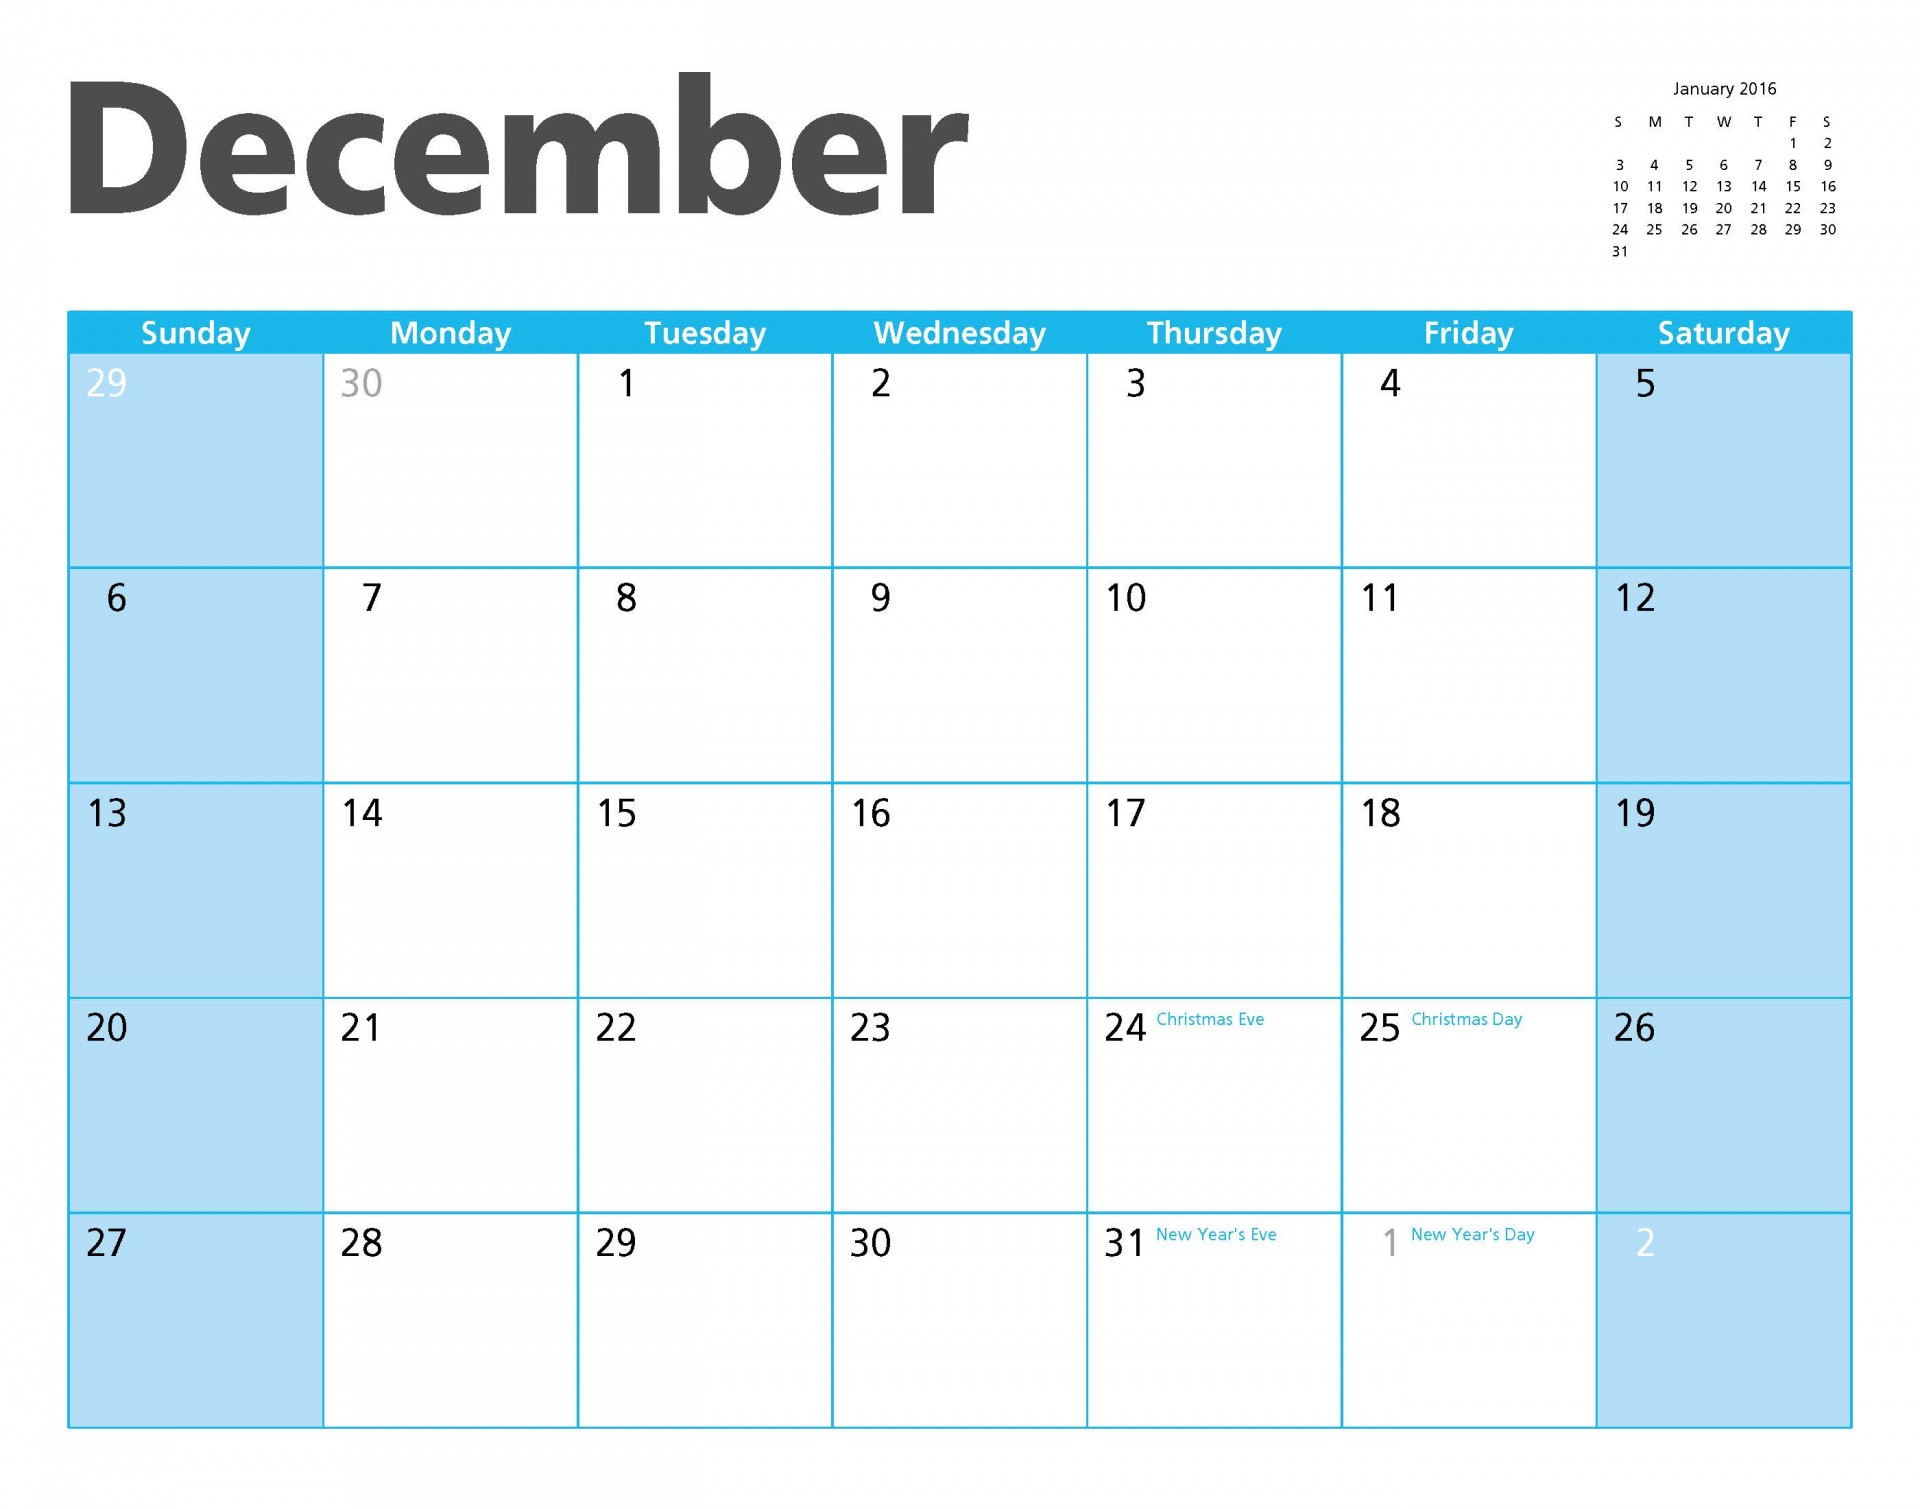 december-2015-calendar-page-free-stock-photo-public-domain-pictures